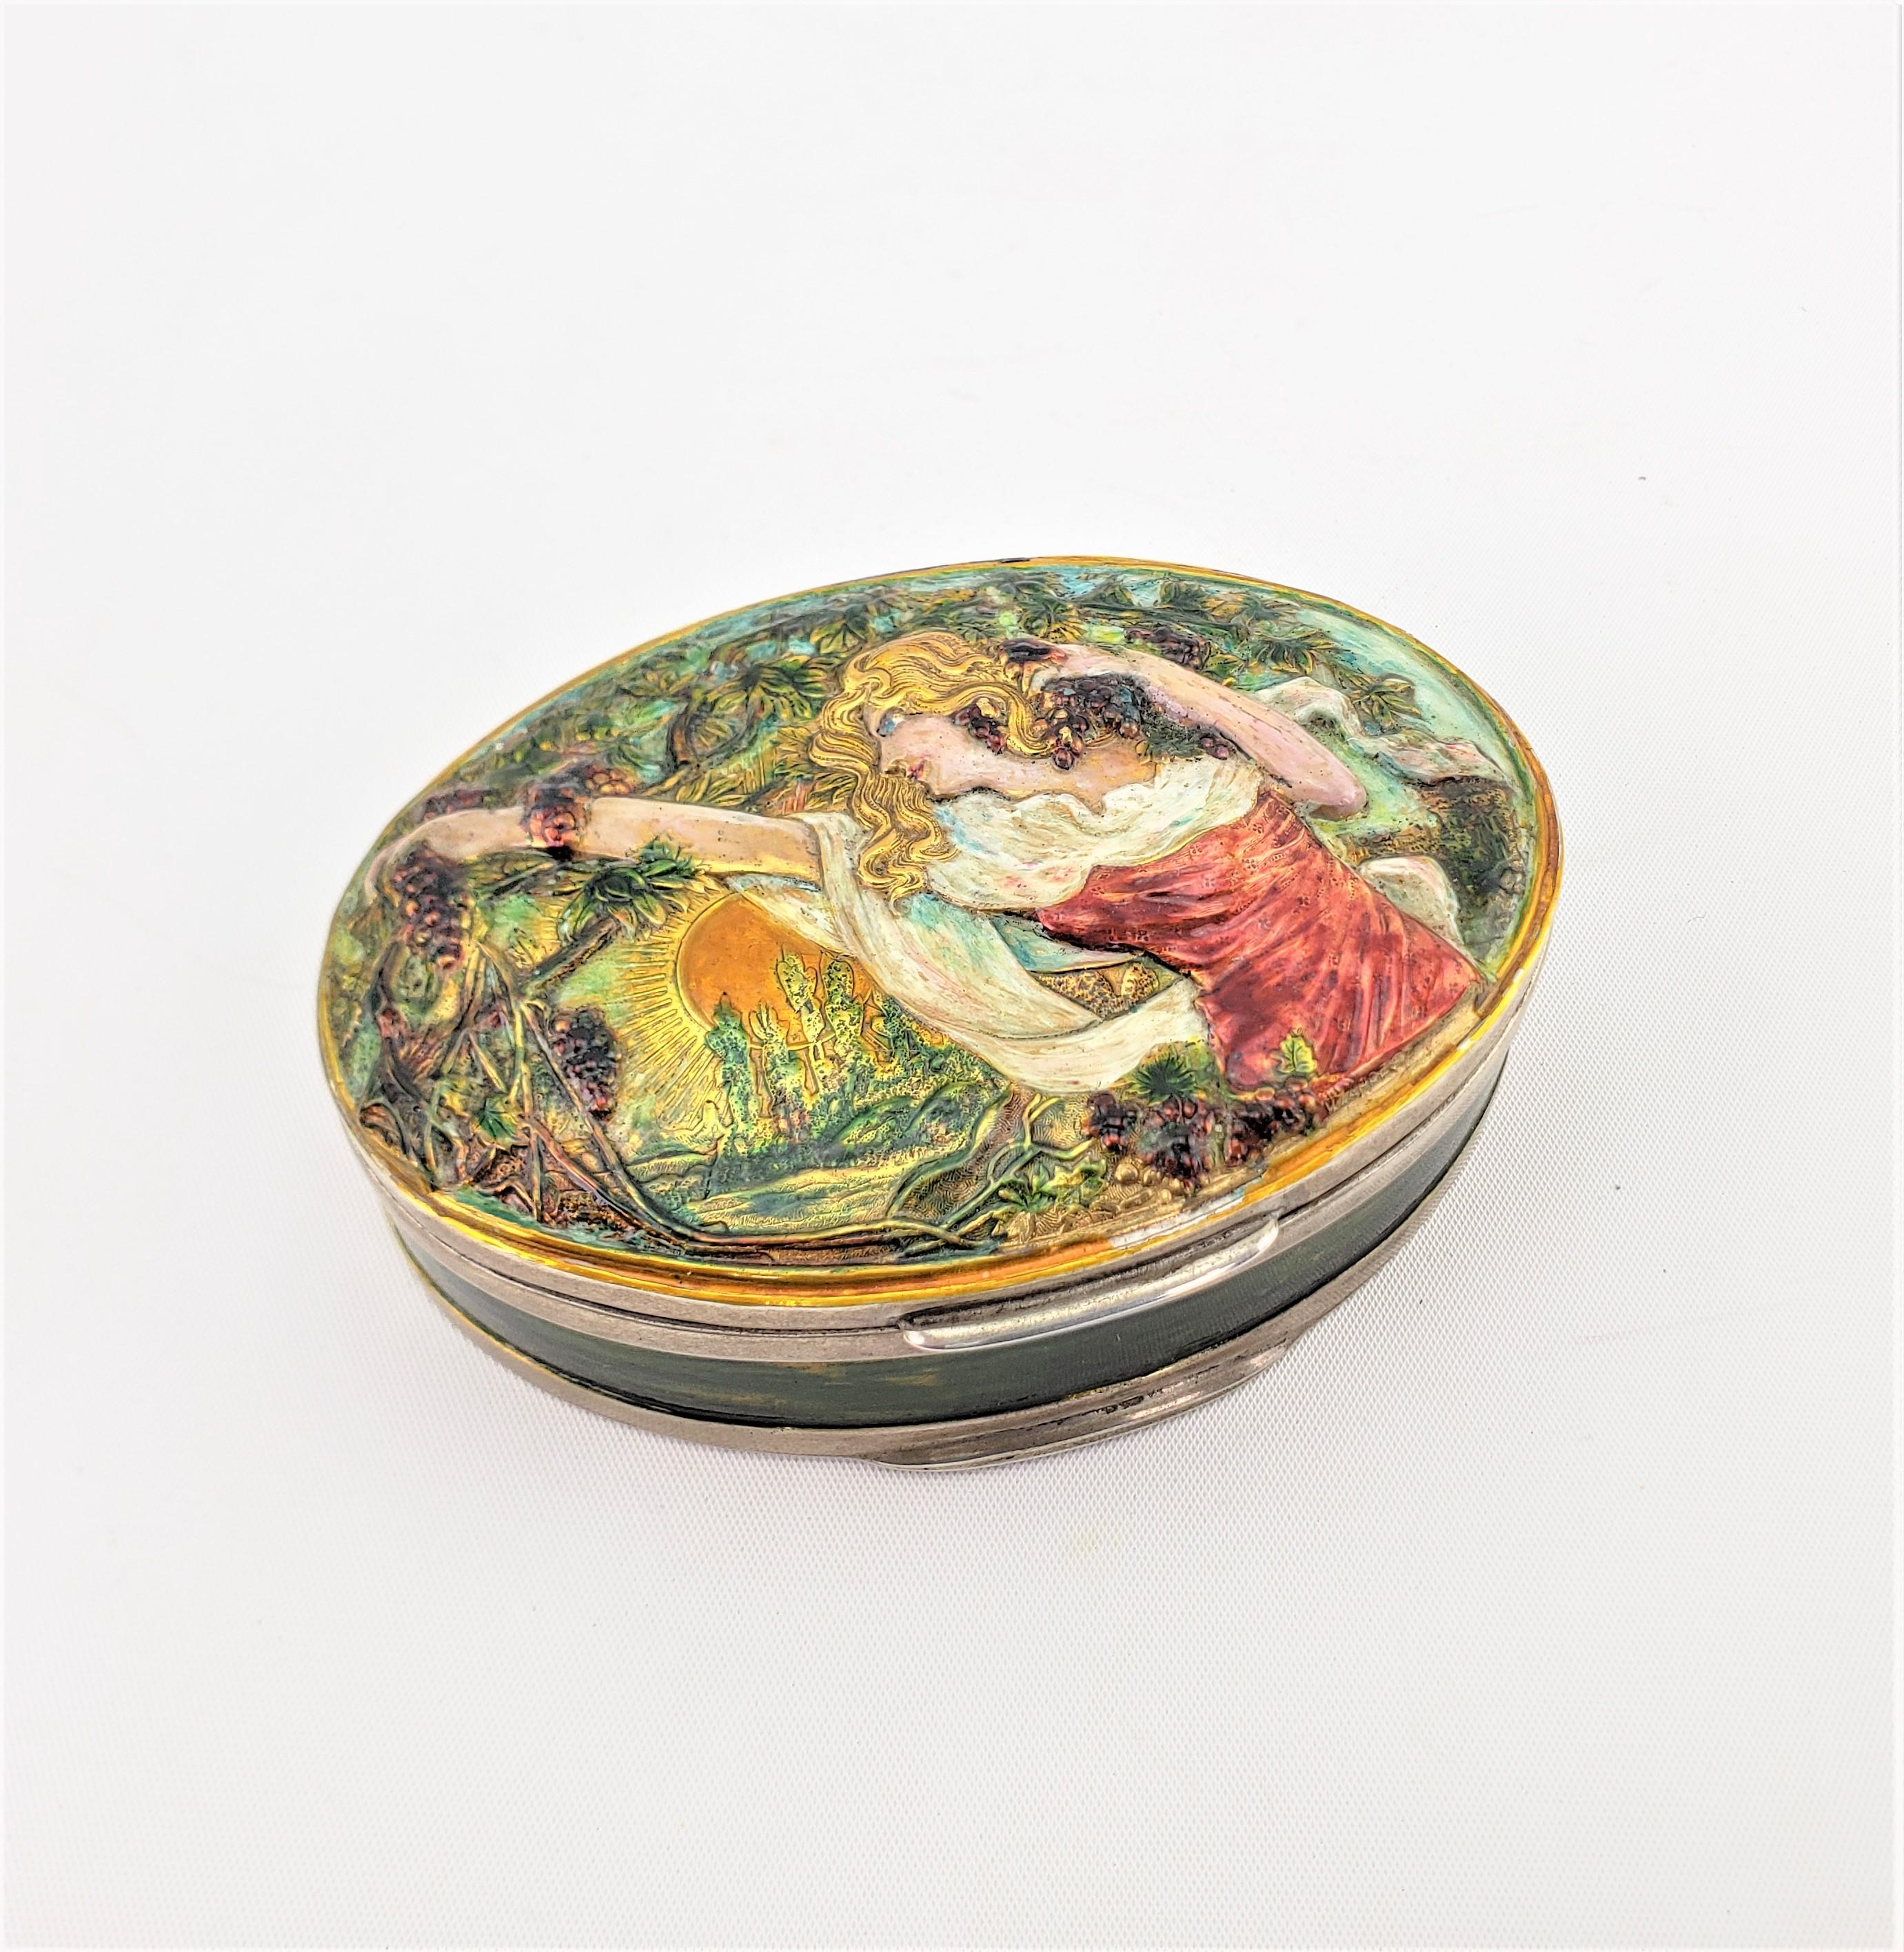 This antique Continental silver and enamel box is hallmarked by an unknown maker, and presumed to have been made in Austria in approximately 1890 in the period Art Nouveau style. The oval shaped box is done in silver with an very well executed